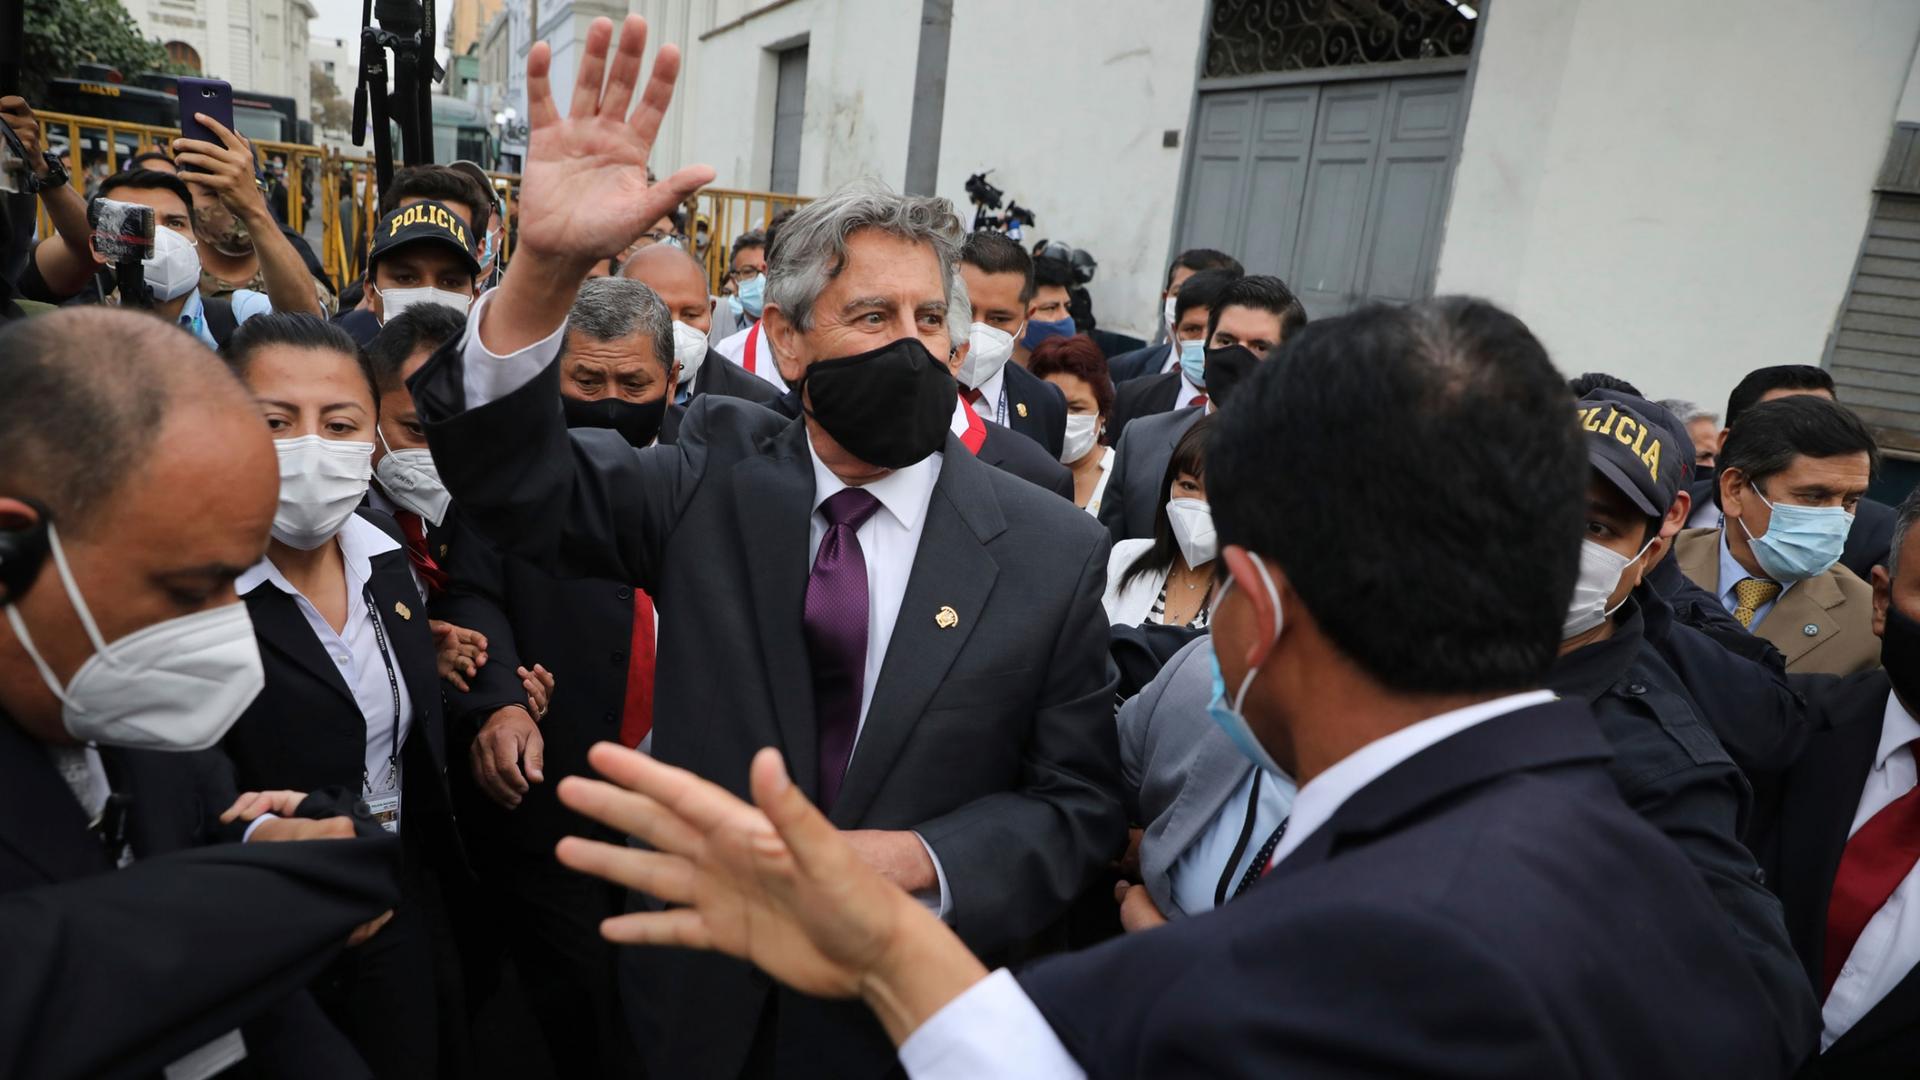 Peru's new President Francisco Sagasti is shown among a large crowd of people while wearing a face mask and waving.